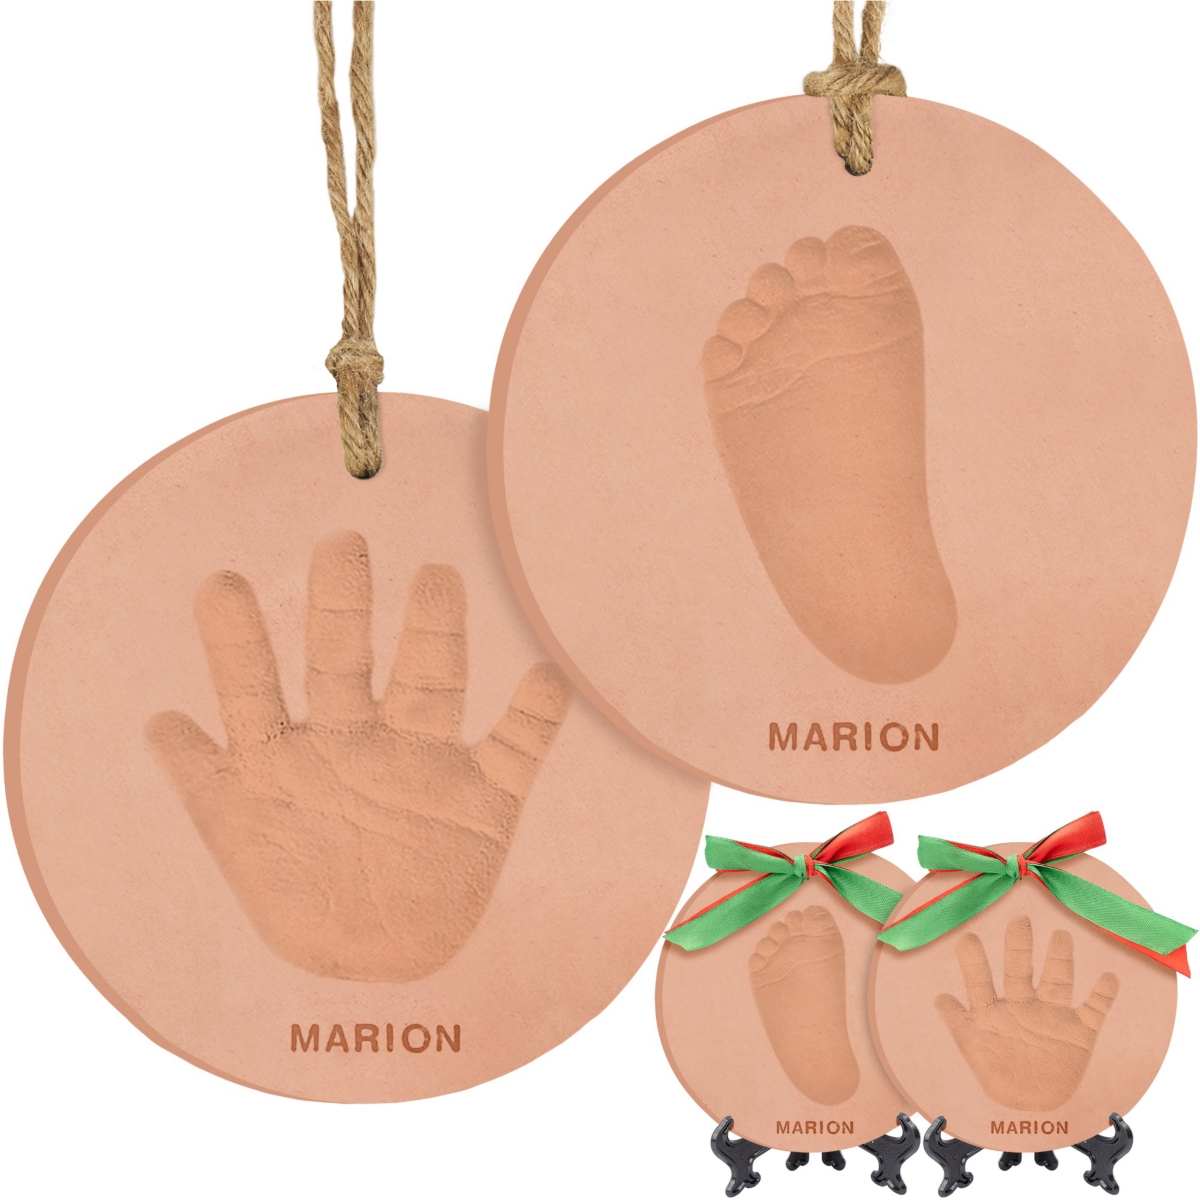 Keababies 2pk Baby Hand And Footprint Ornament Kit, Personalized All-in-1 Baby Foot Print Kit For Newborn, Col In Brown